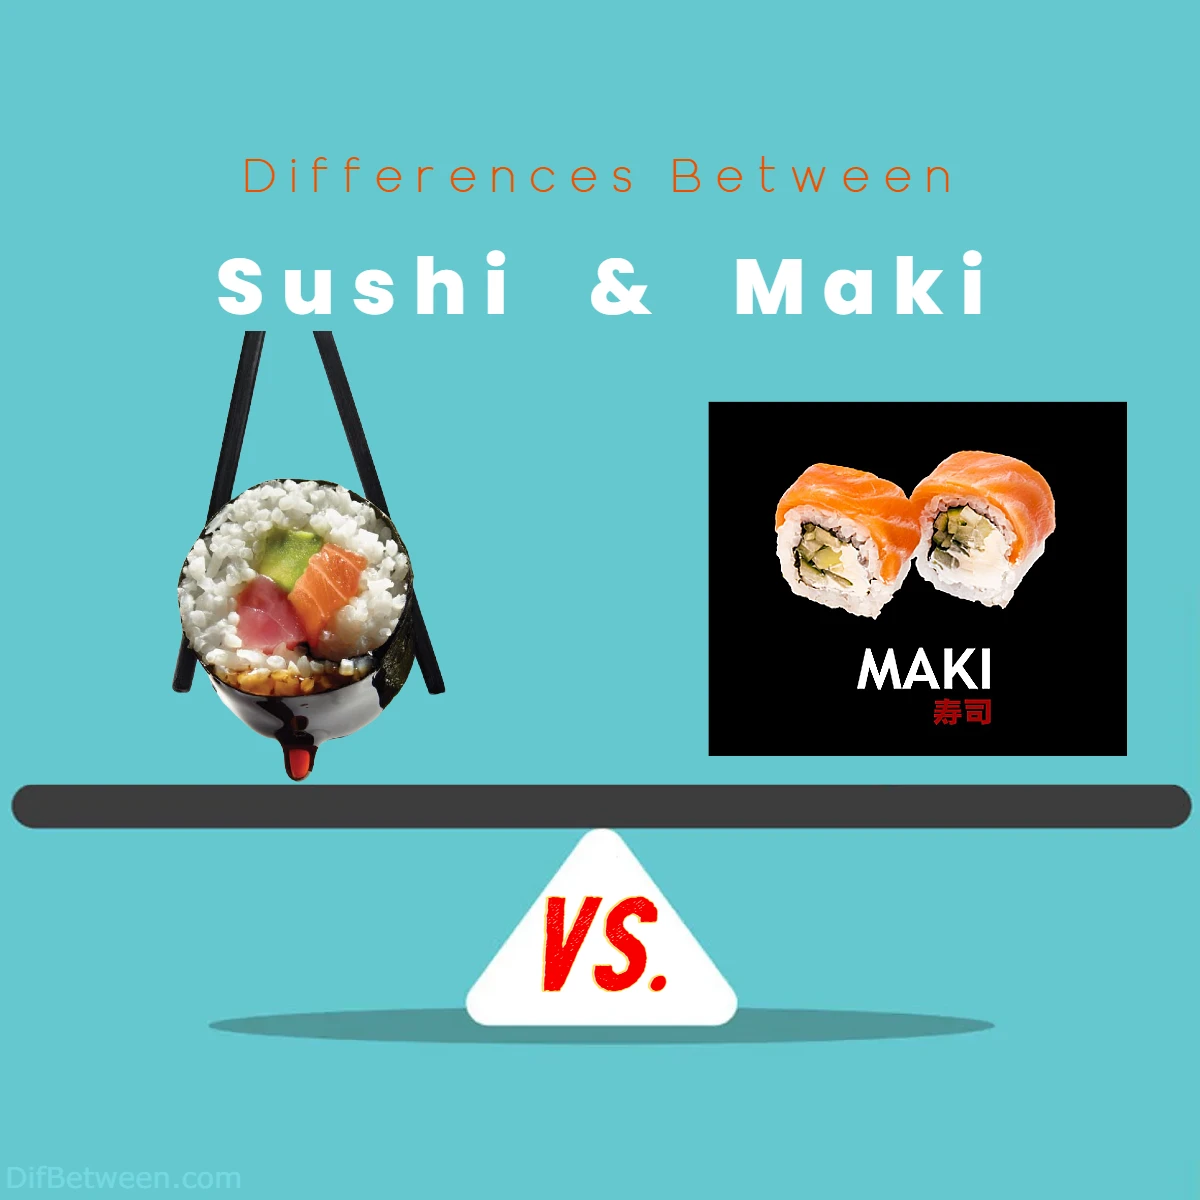 Differences Between Sushi vs Maki